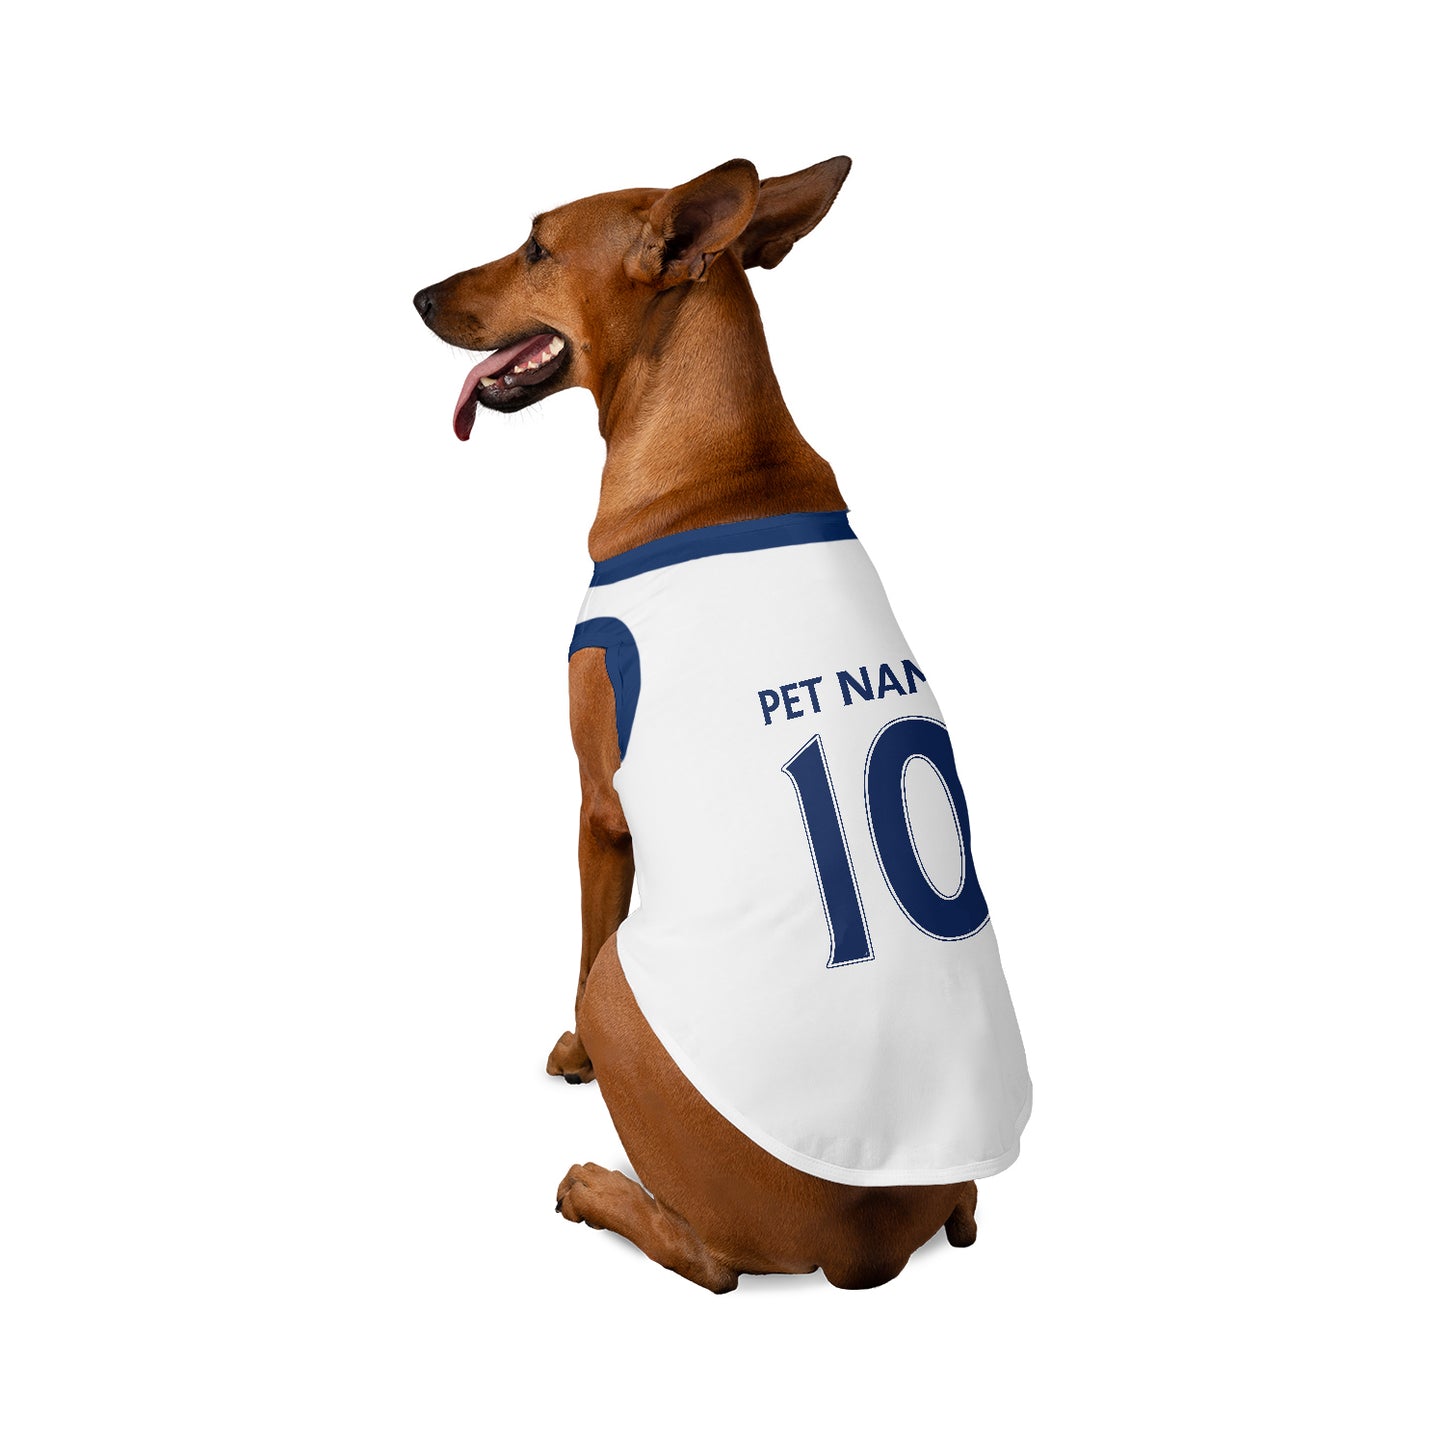 Tottenham Hotspur Kit FC 23/24 - Personalised Football Tank Top for Dog and Cat Costume (with real FC logo option)